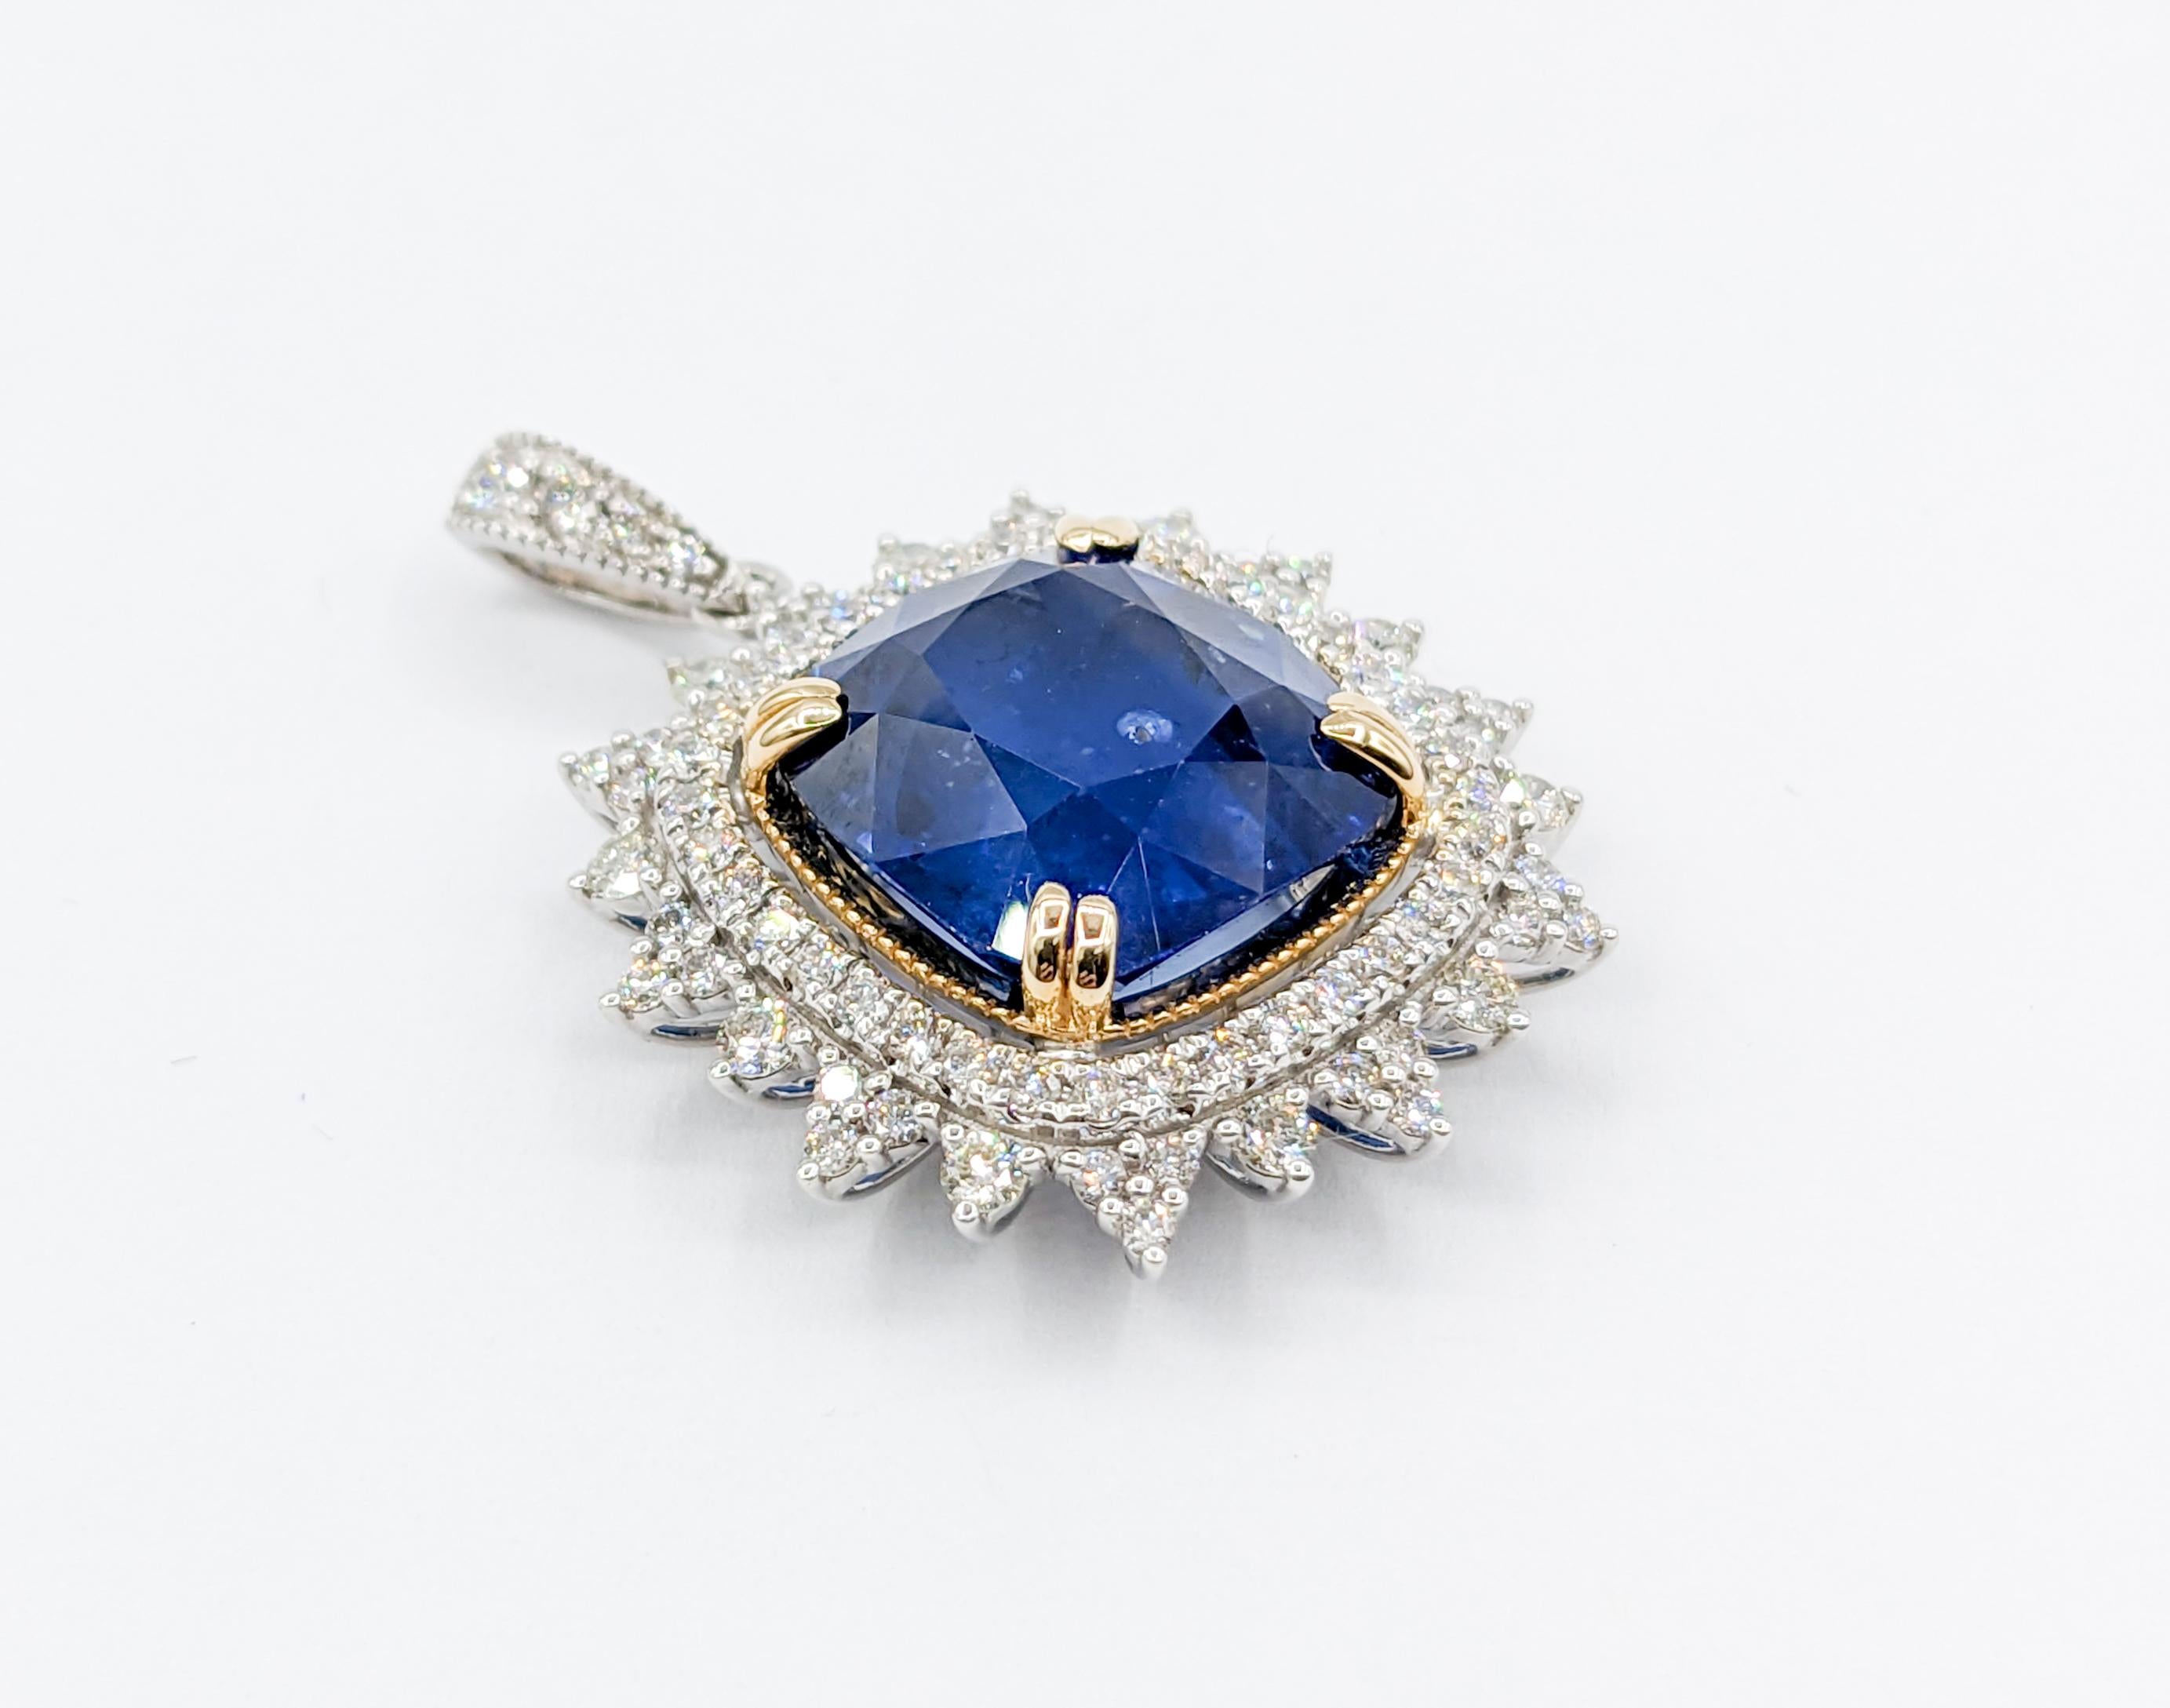 Women's Stunning 14.2ct Sapphire Pendant with Diamond Halo in 14kt White Gold For Sale